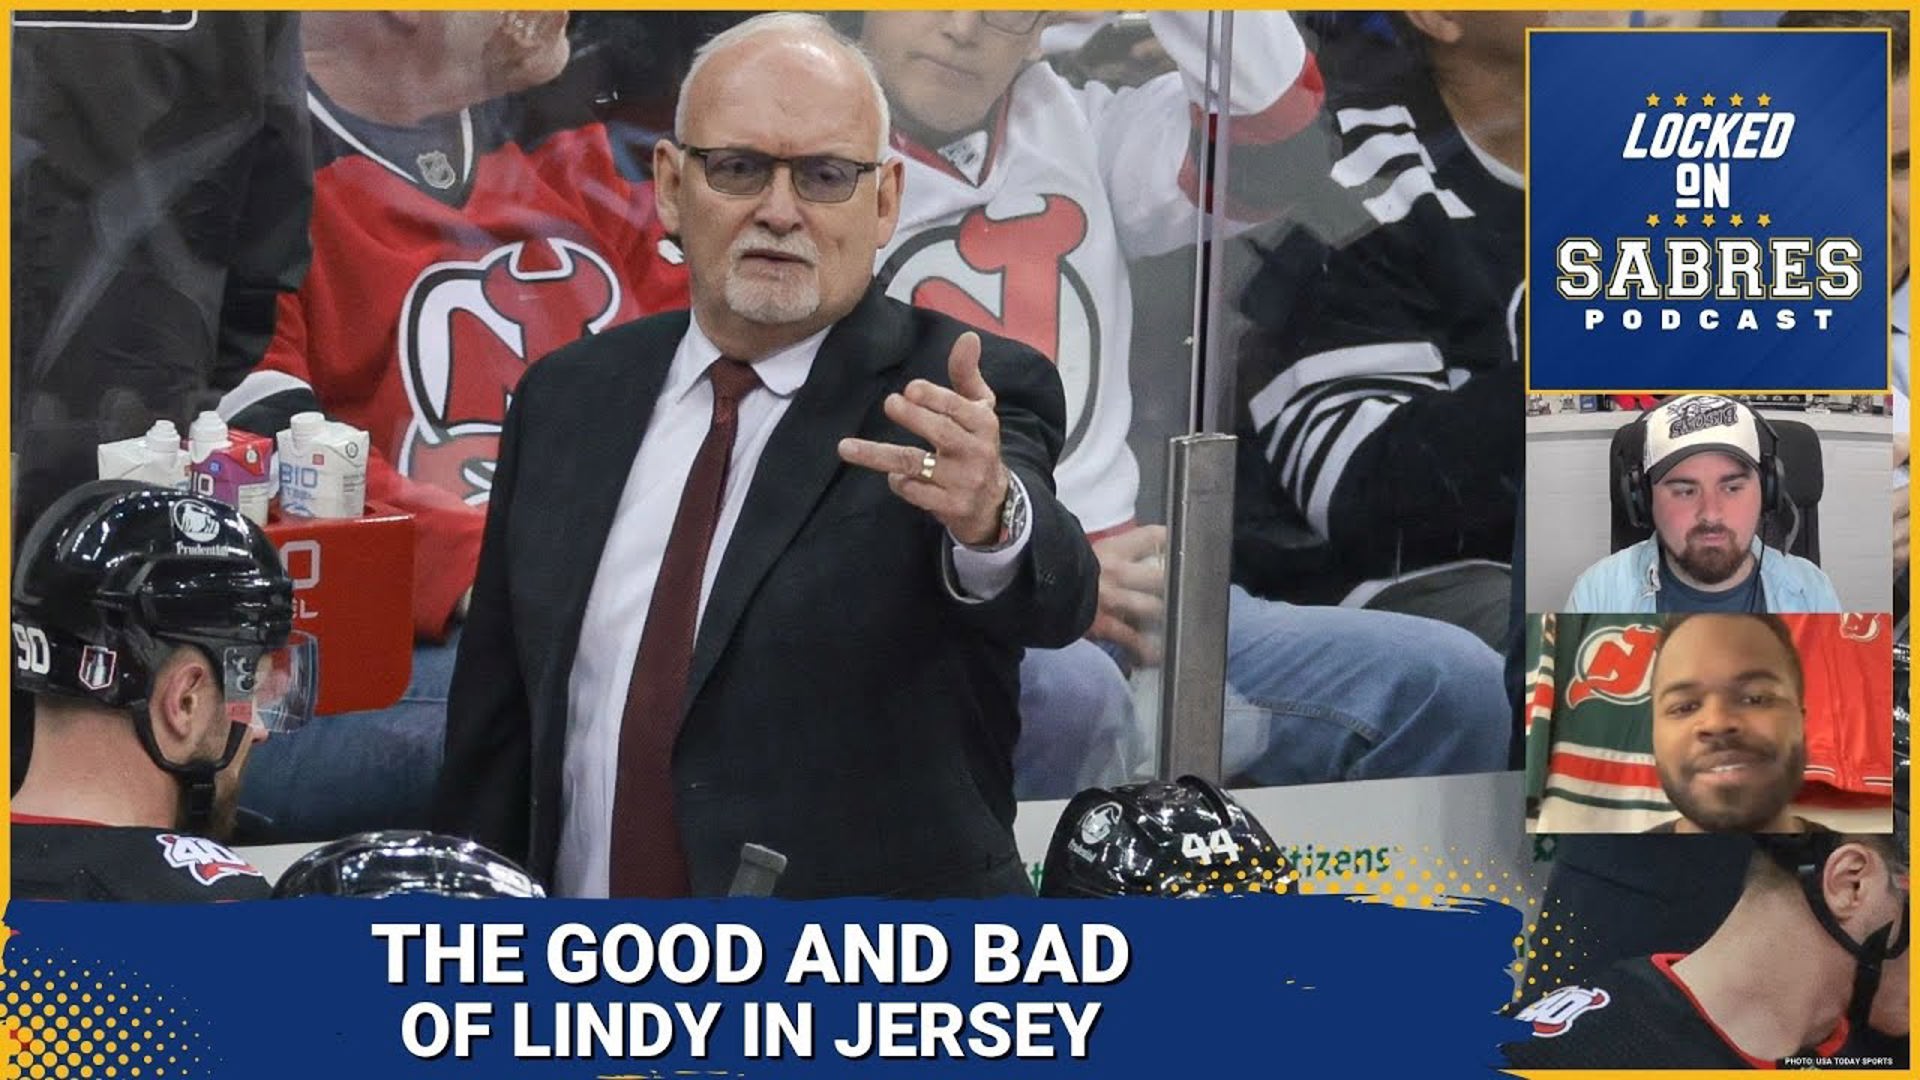 What went right and wrong for Lindy Ruff in New Jersey